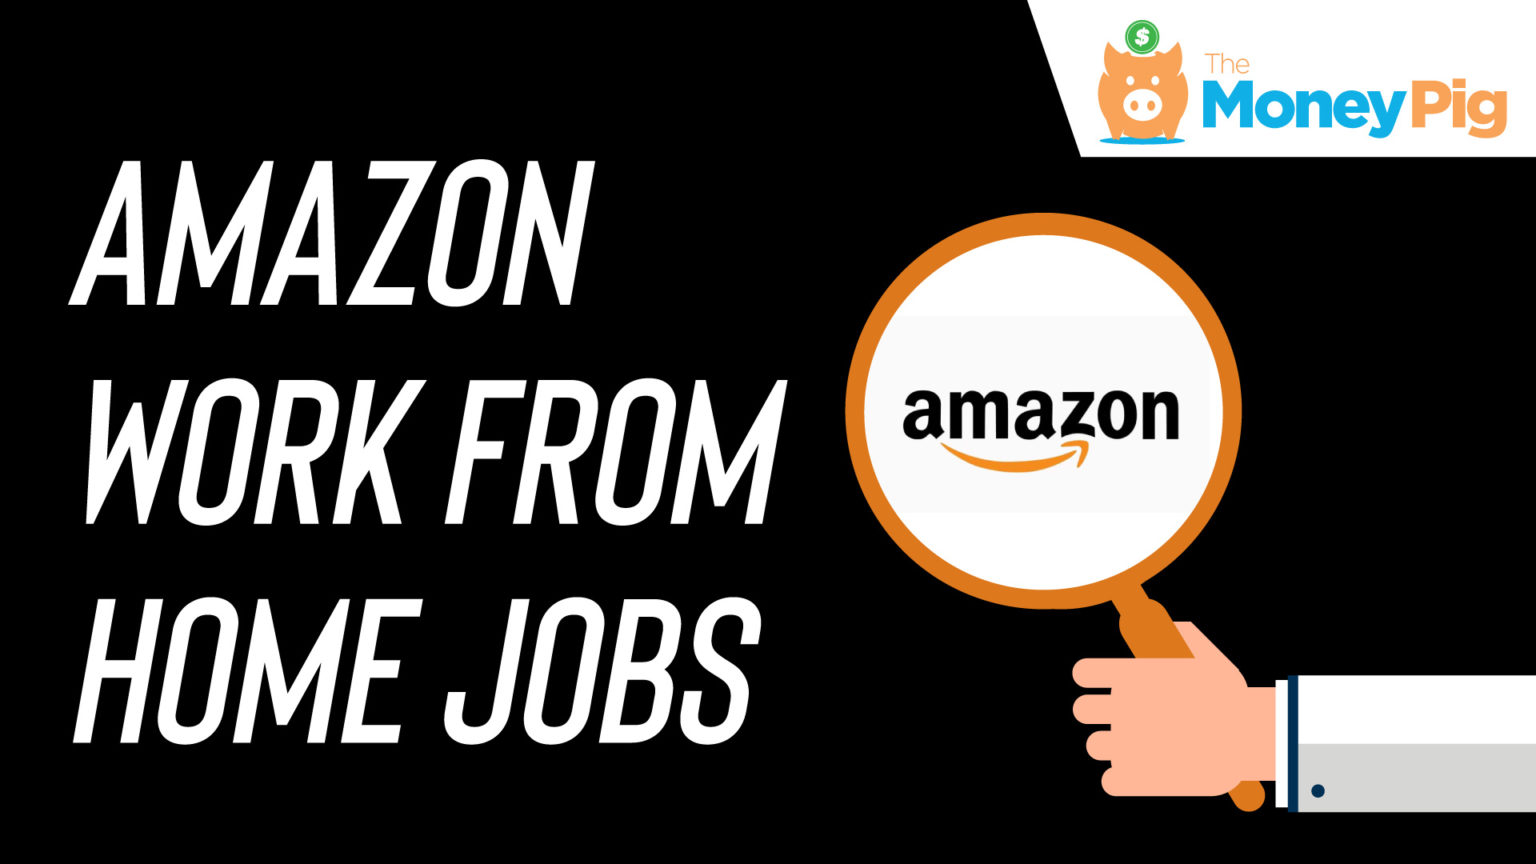 Amazon Work From Home Jobs - The Money Pig